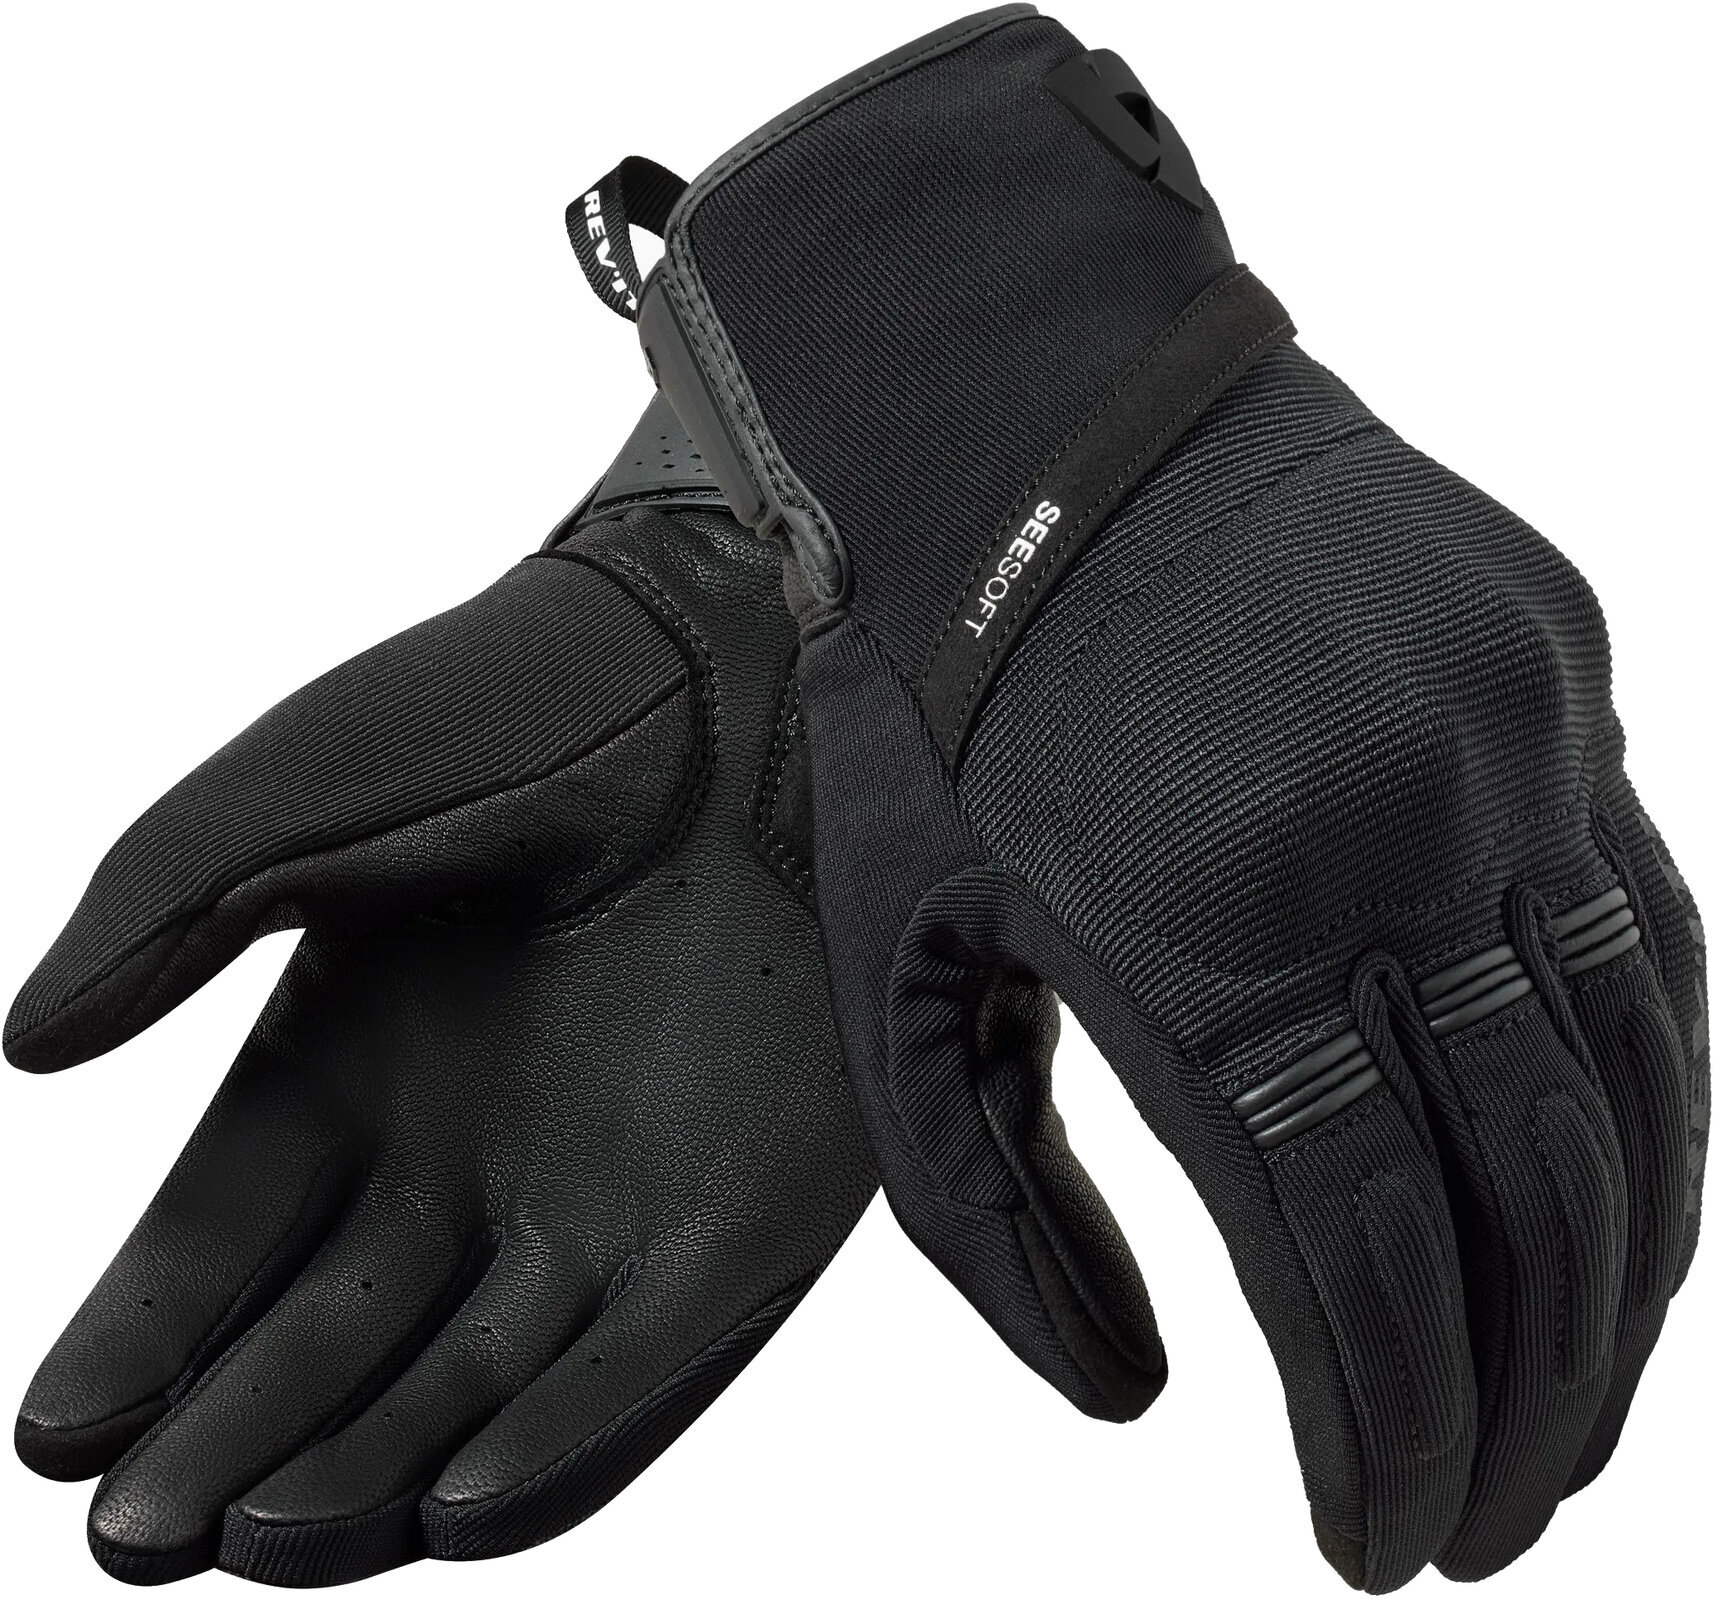 Motorcycle Gloves Rev'it! Gloves Mosca 2 Black 4XL Motorcycle Gloves